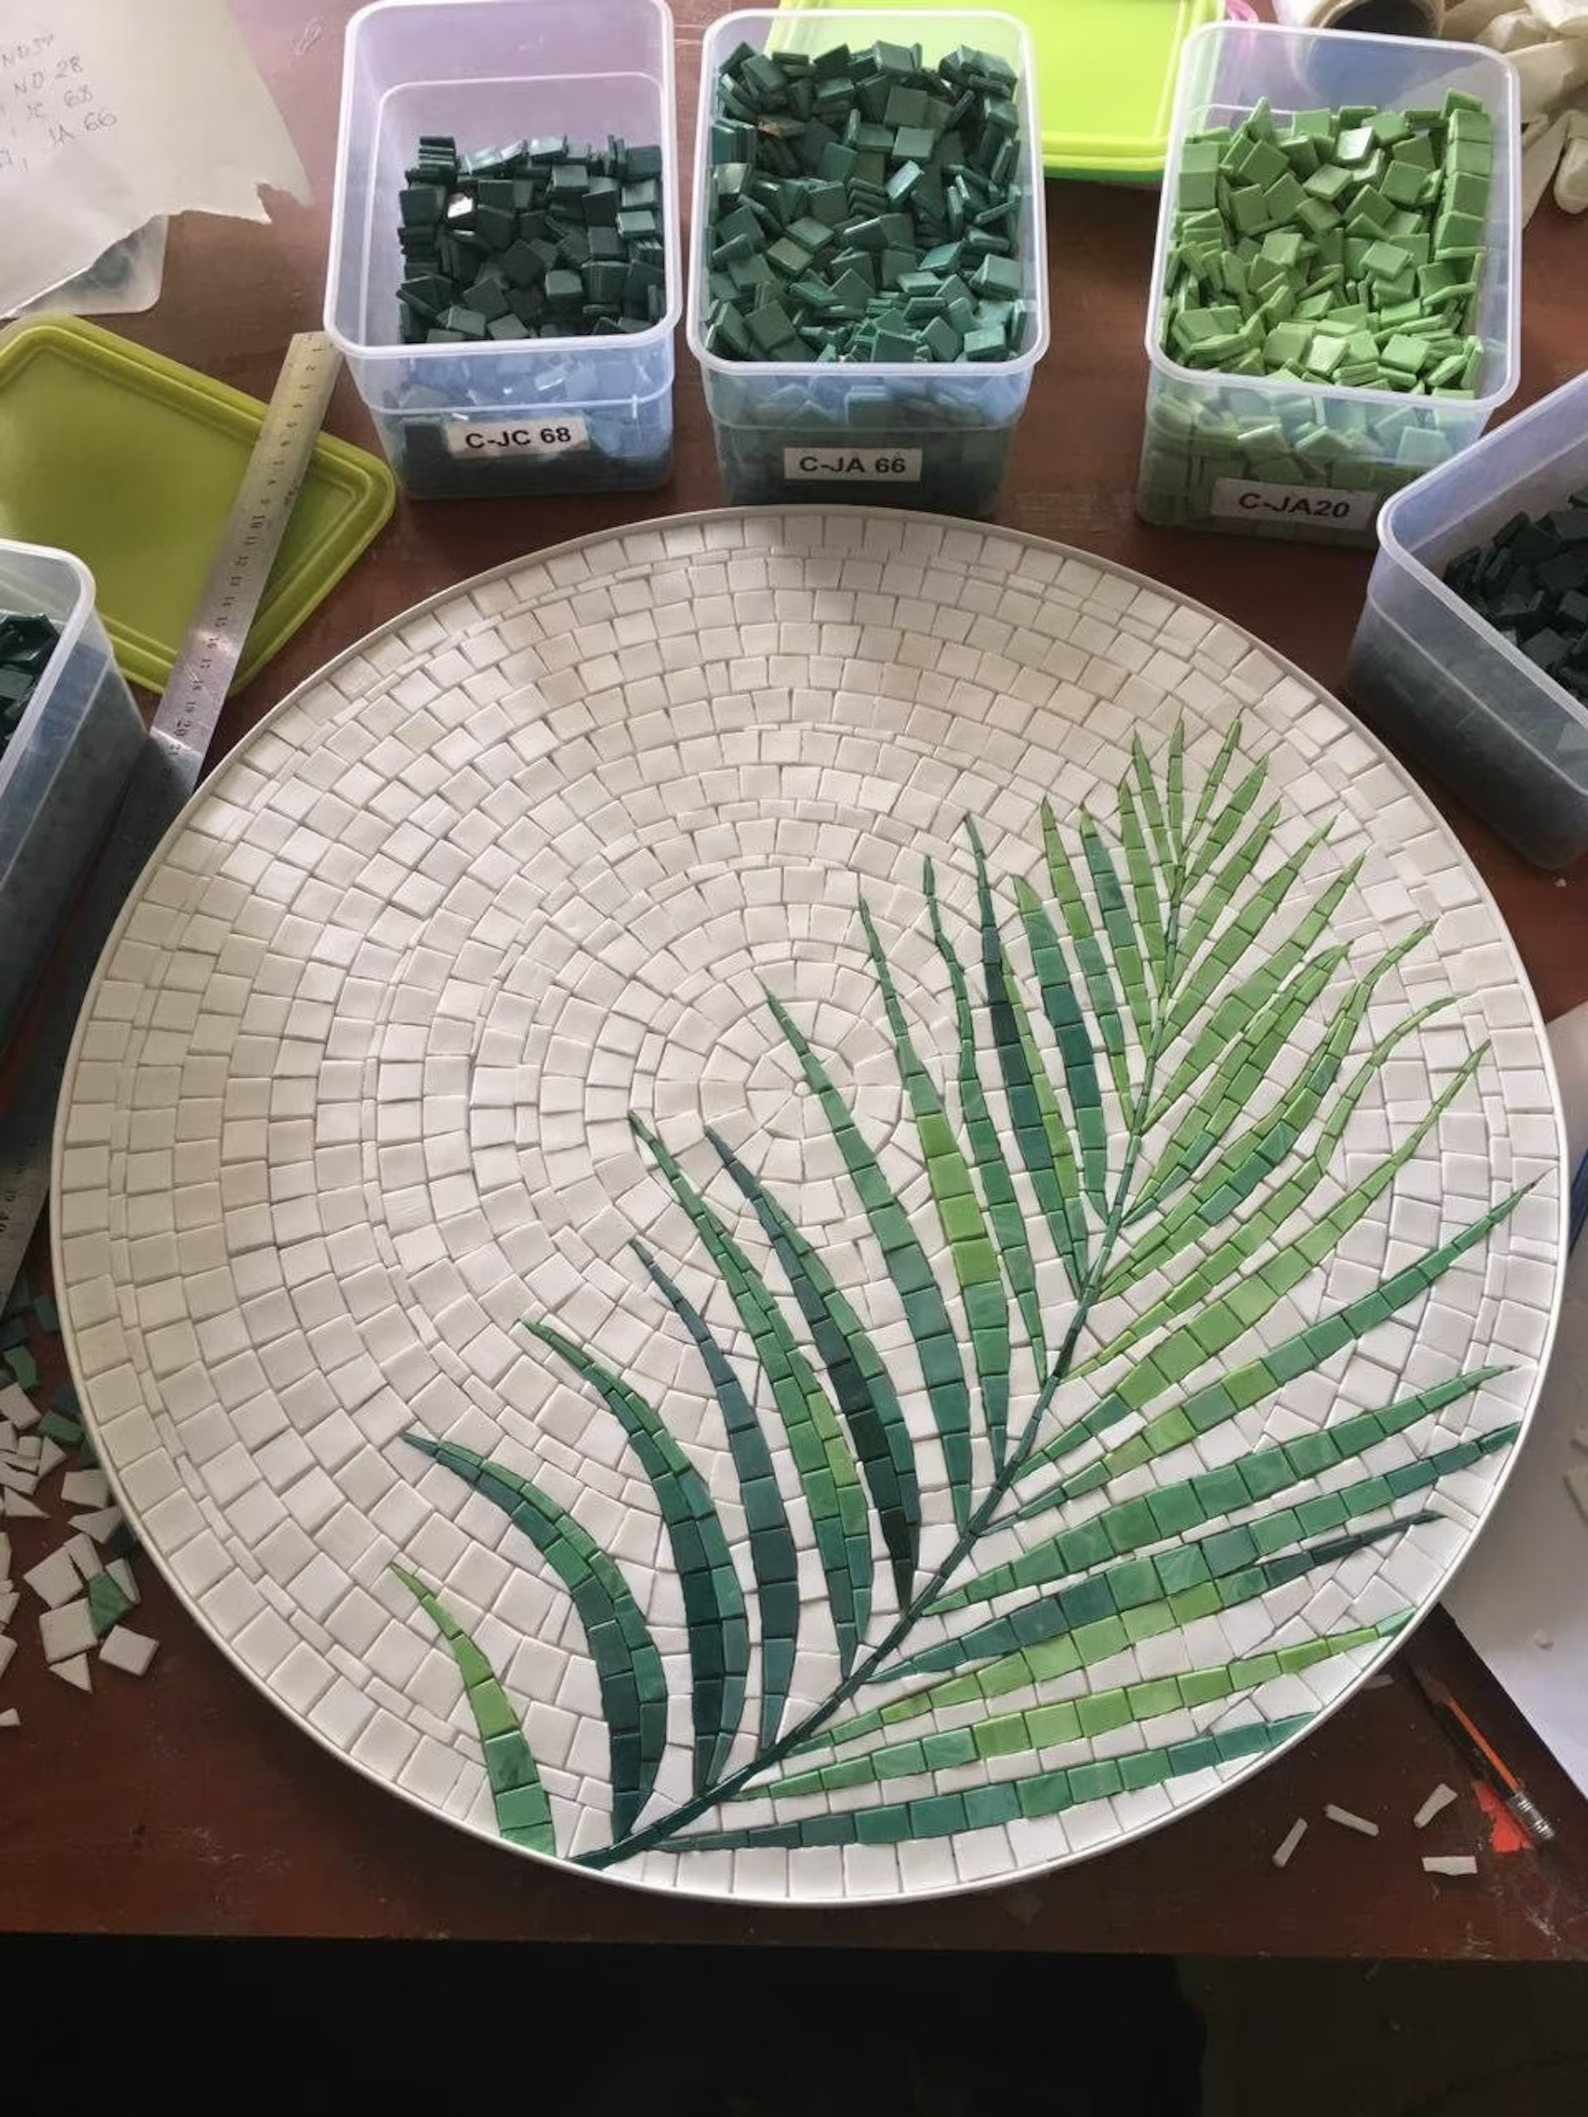 Stunning DIY Mosaic Garden Table Designs
for Your Patio